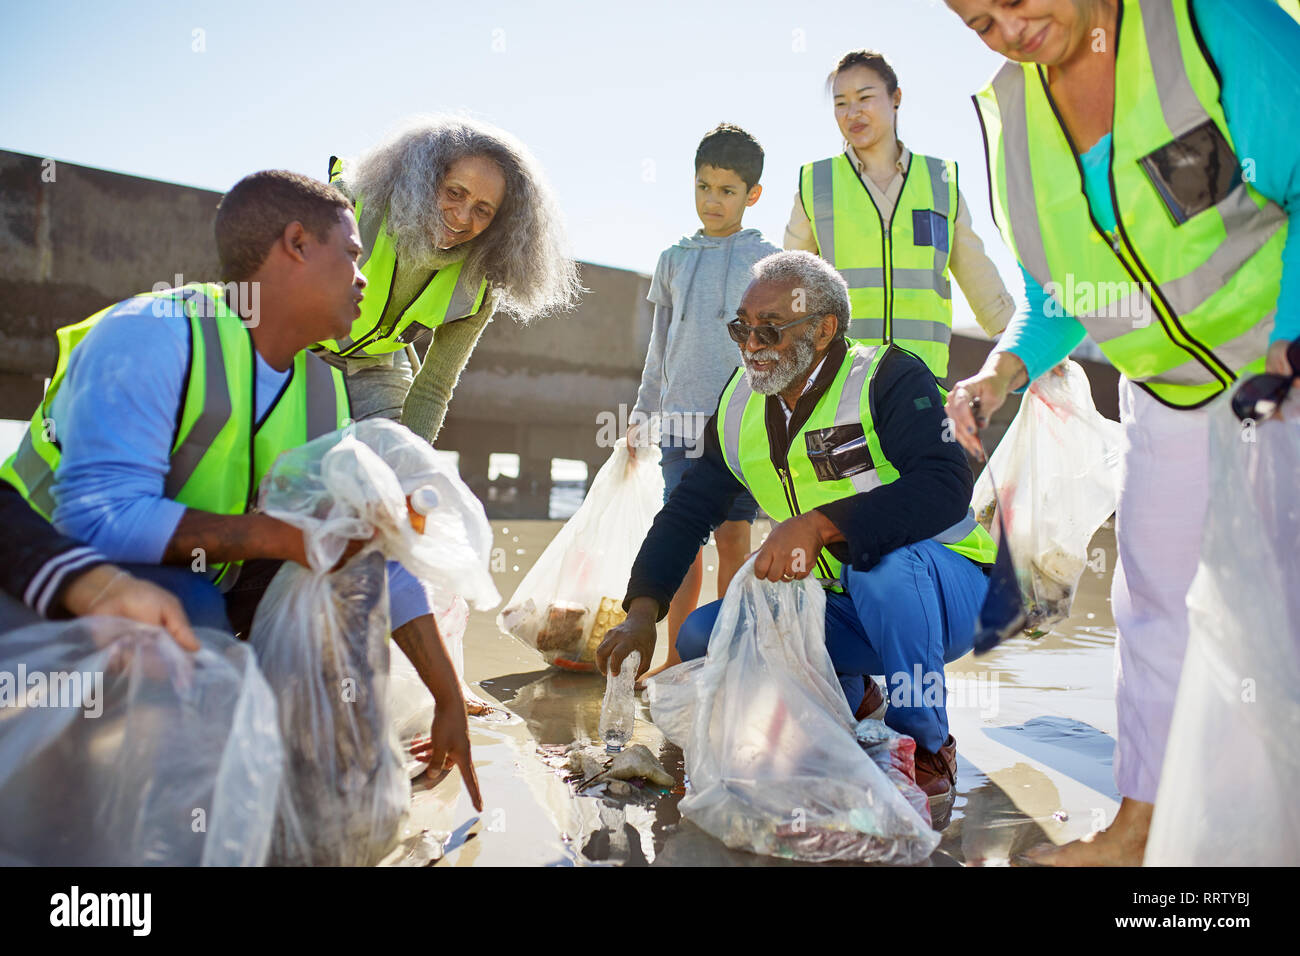 Volunteers cleaning up litter on sunny beach Stock Photo